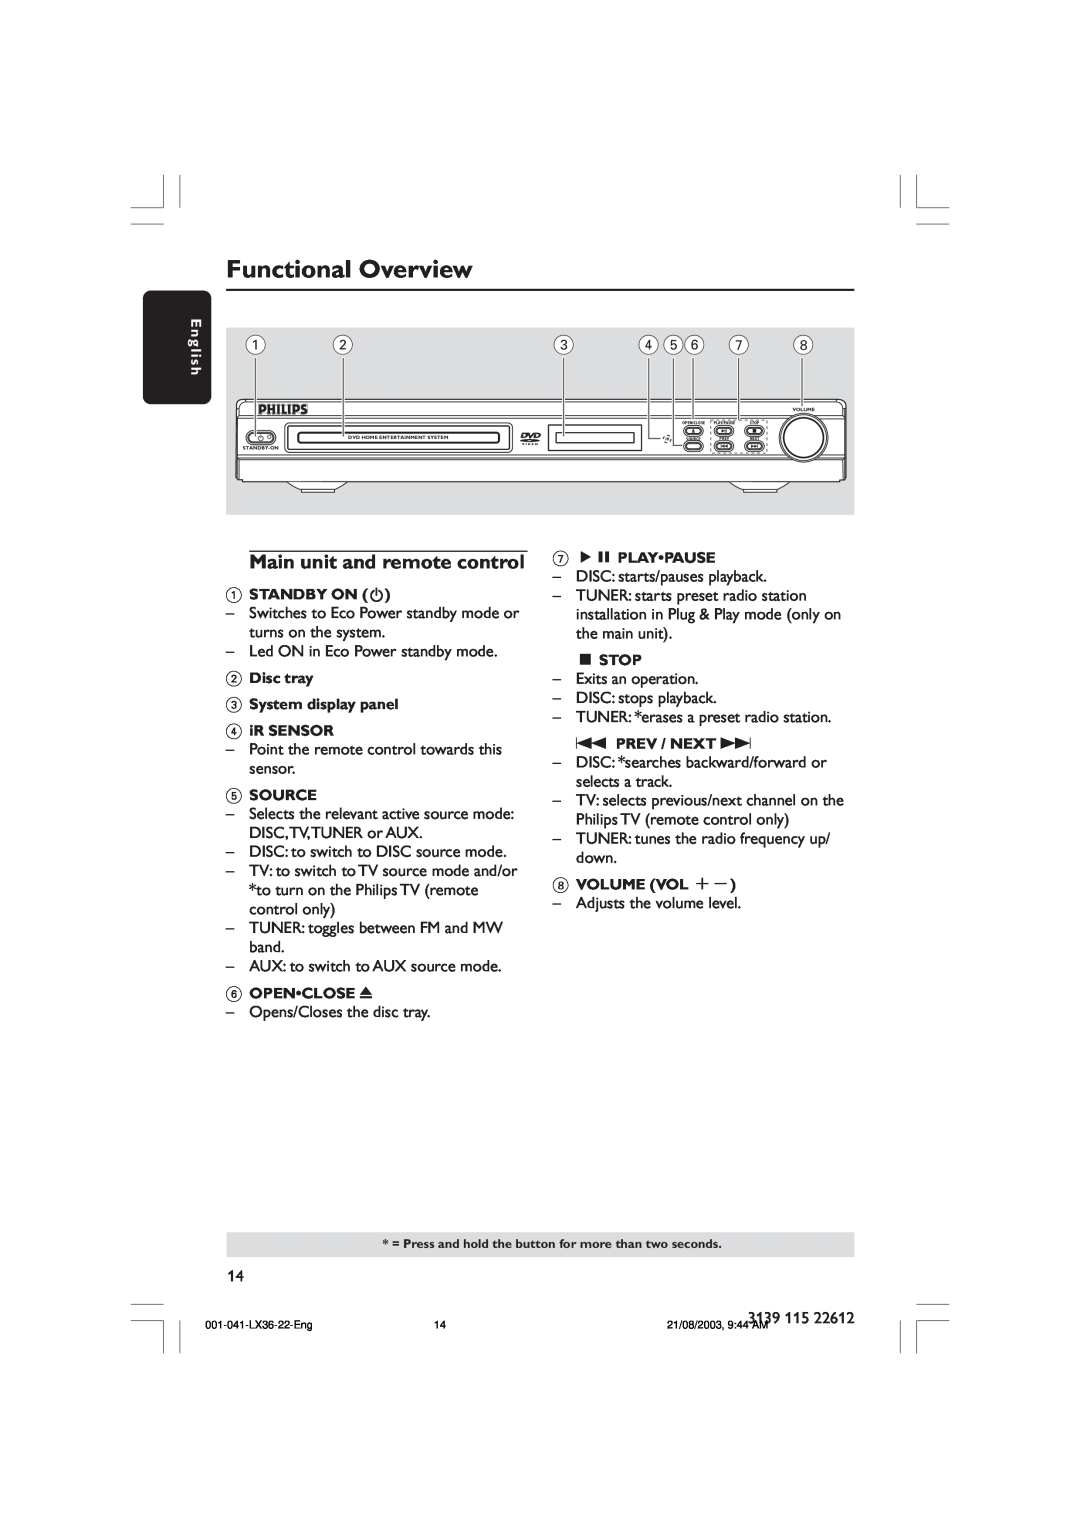 Philips LX3600D/25 manual Functional Overview, Main unit and remote control 